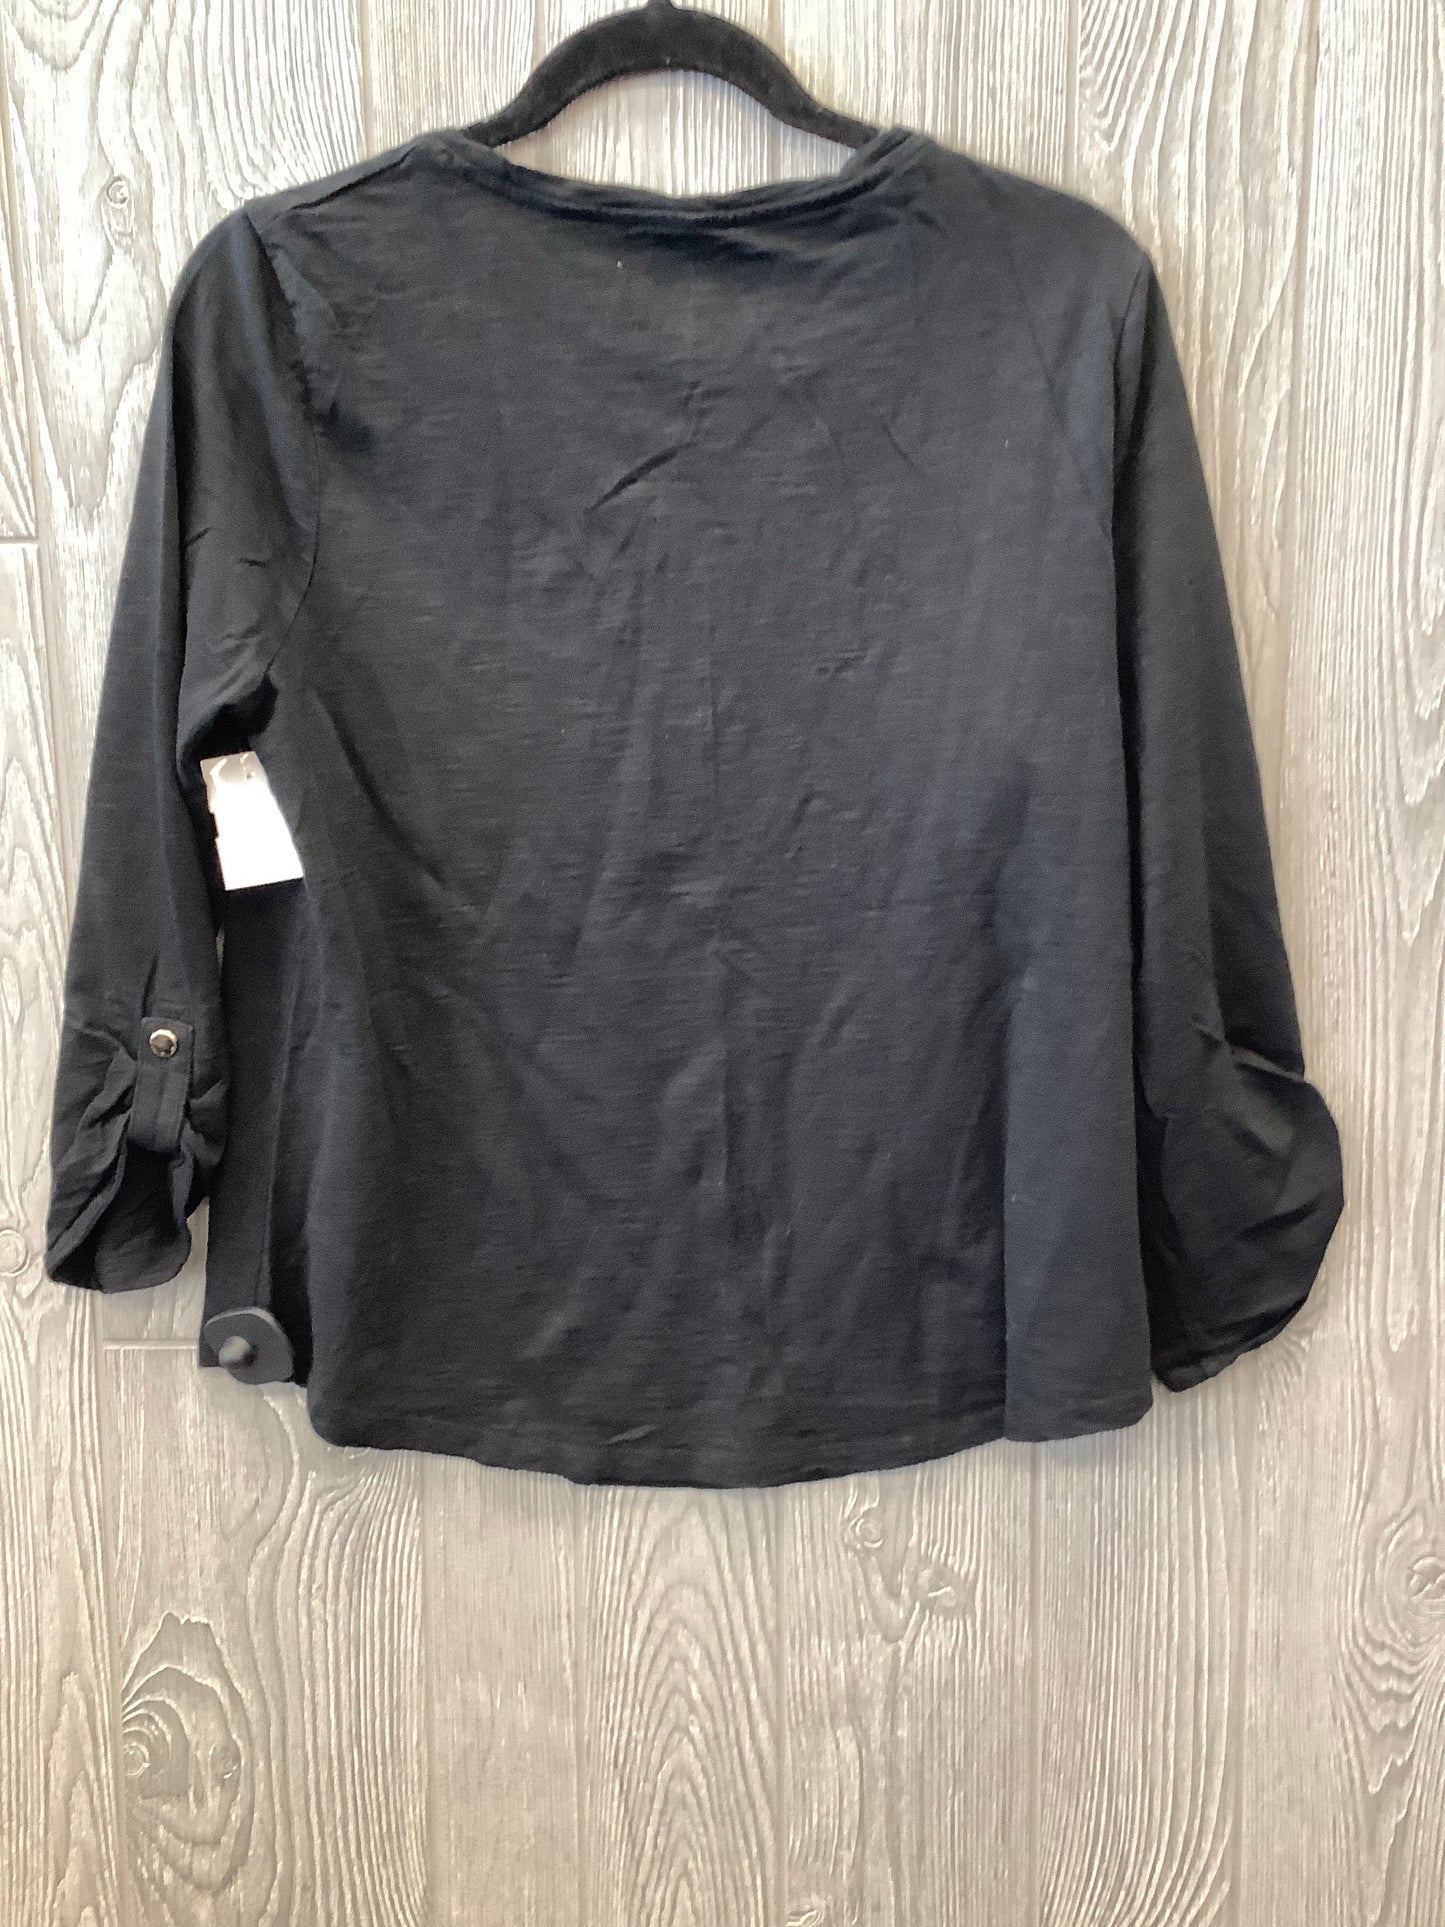 Black Top Long Sleeve Chicos, Size M